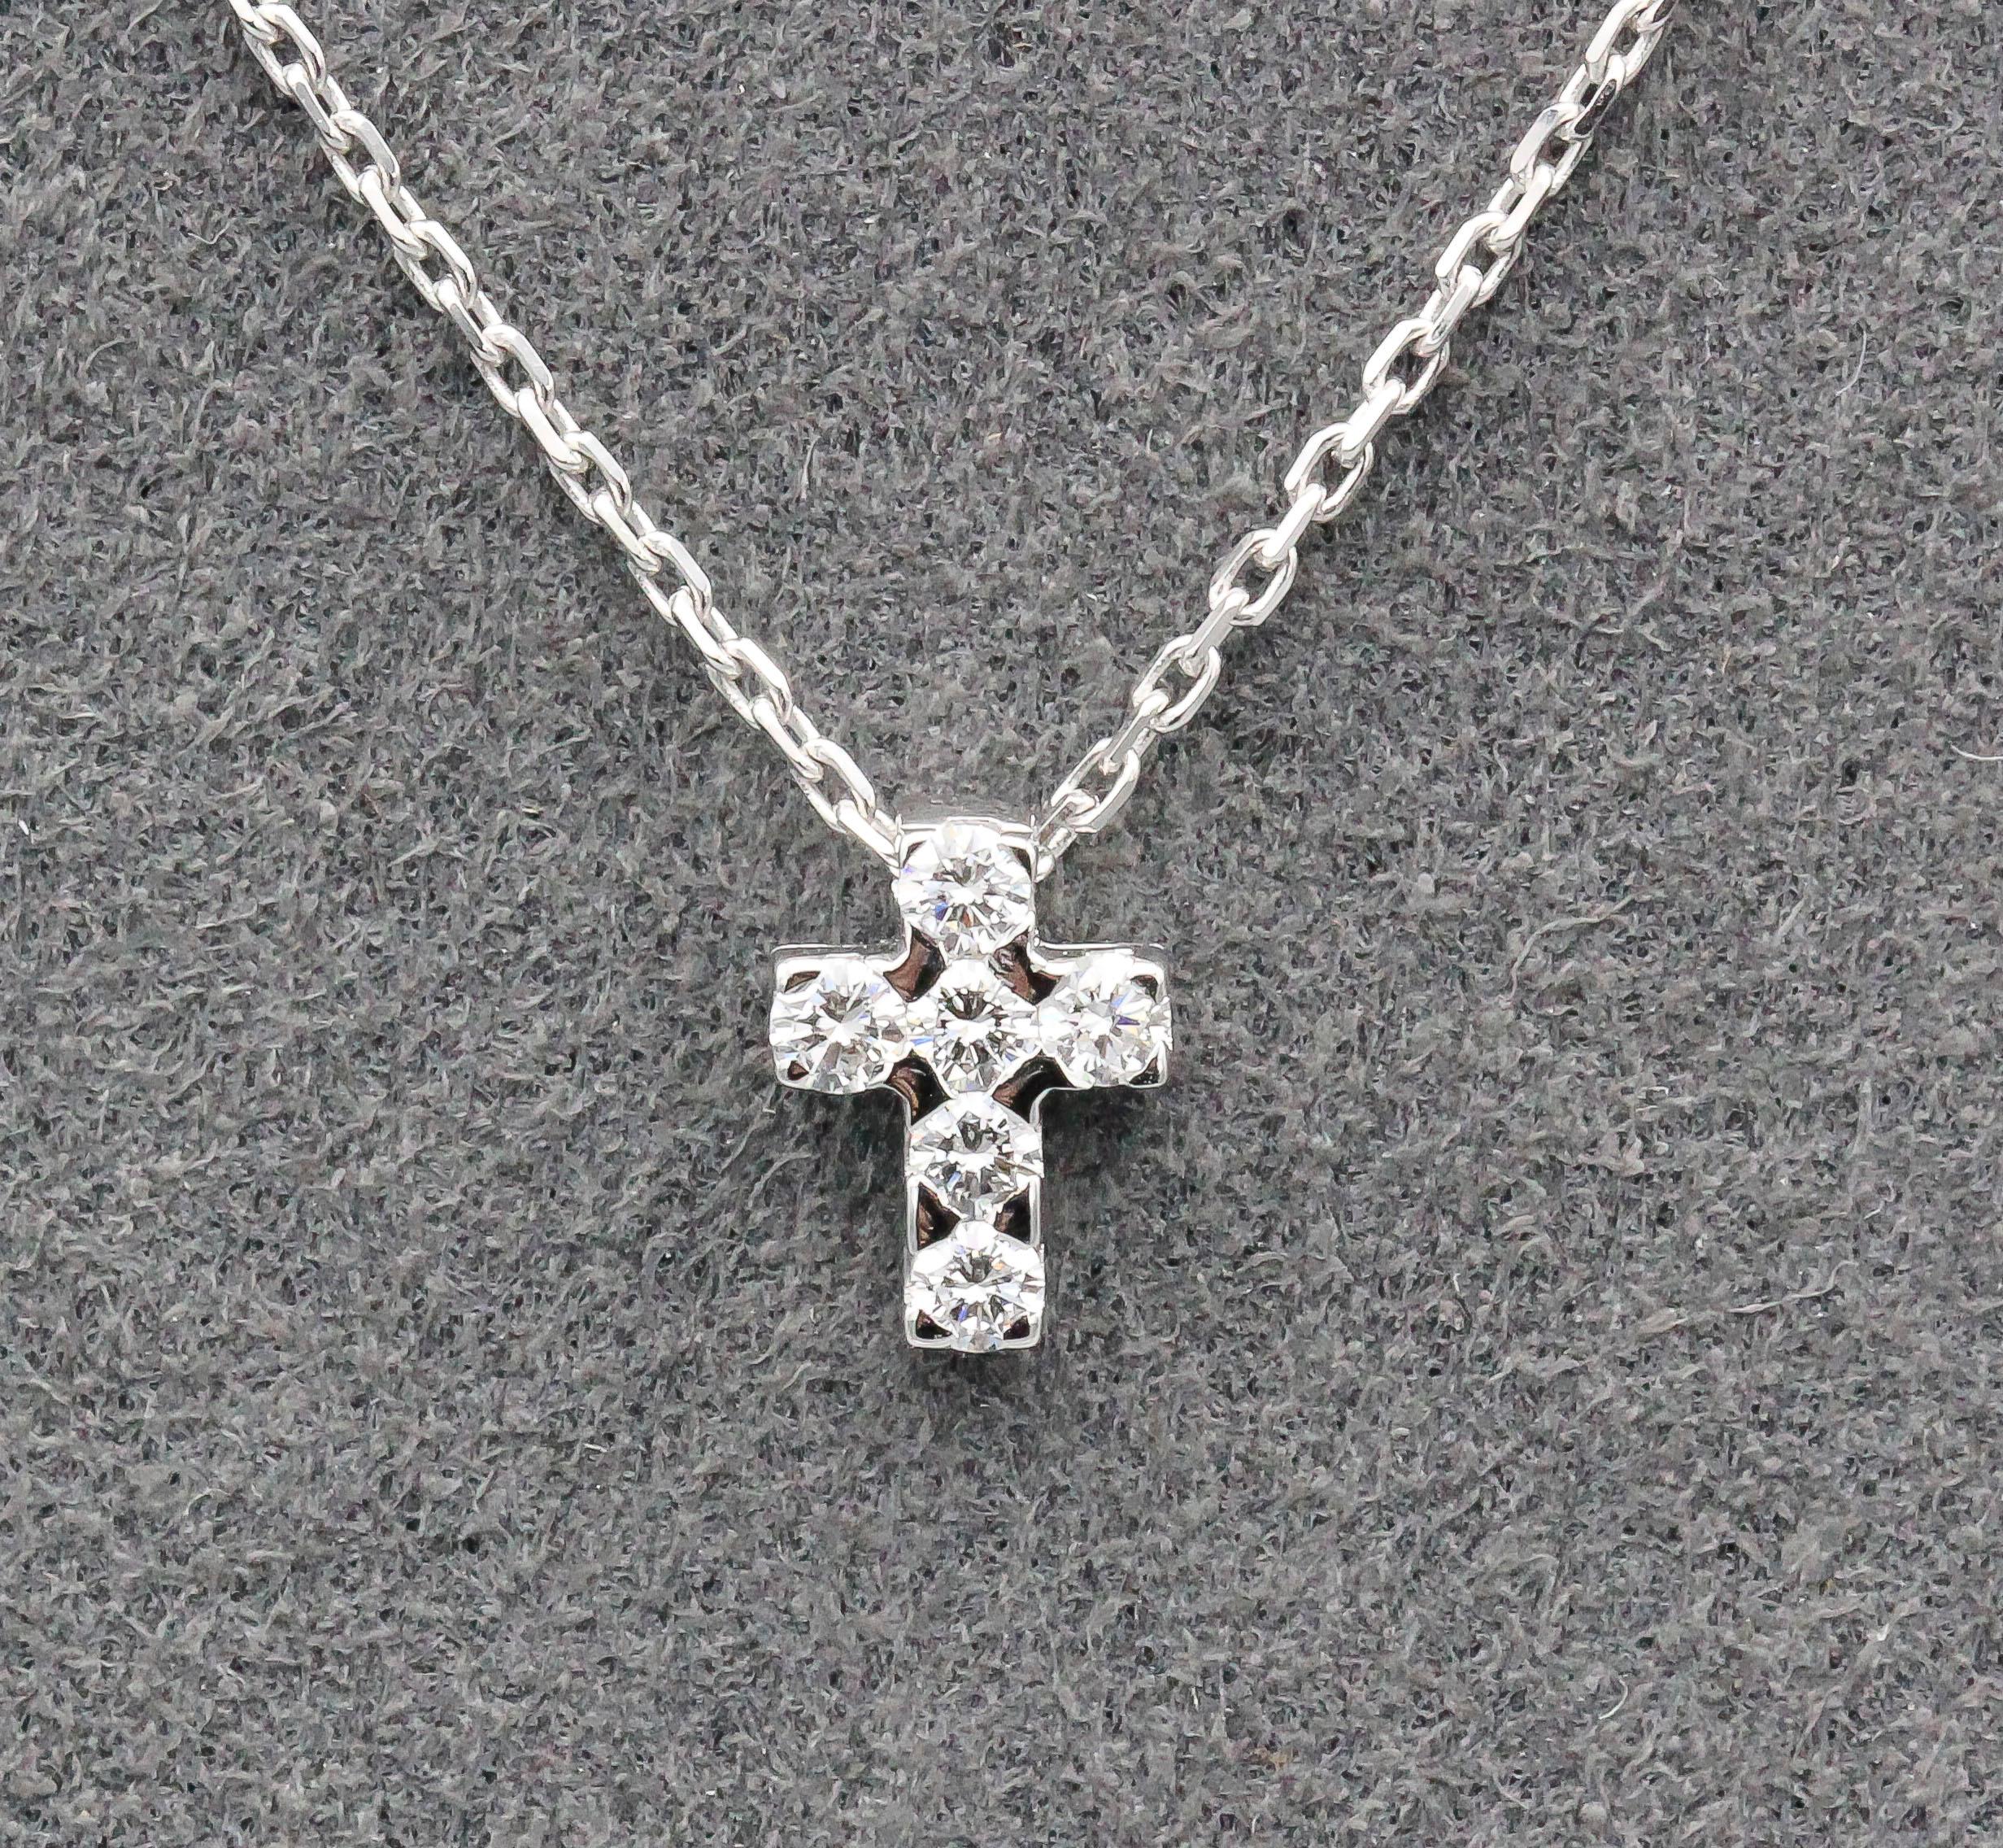 Fine diamond and 18K white gold cross pendant necklace by Van Cleef & Arpels. It is petite in size and unassuming but chic, featuring high quality round diamonds.  Well made and easy to wear, a very fine gift idea.  Total length - 18